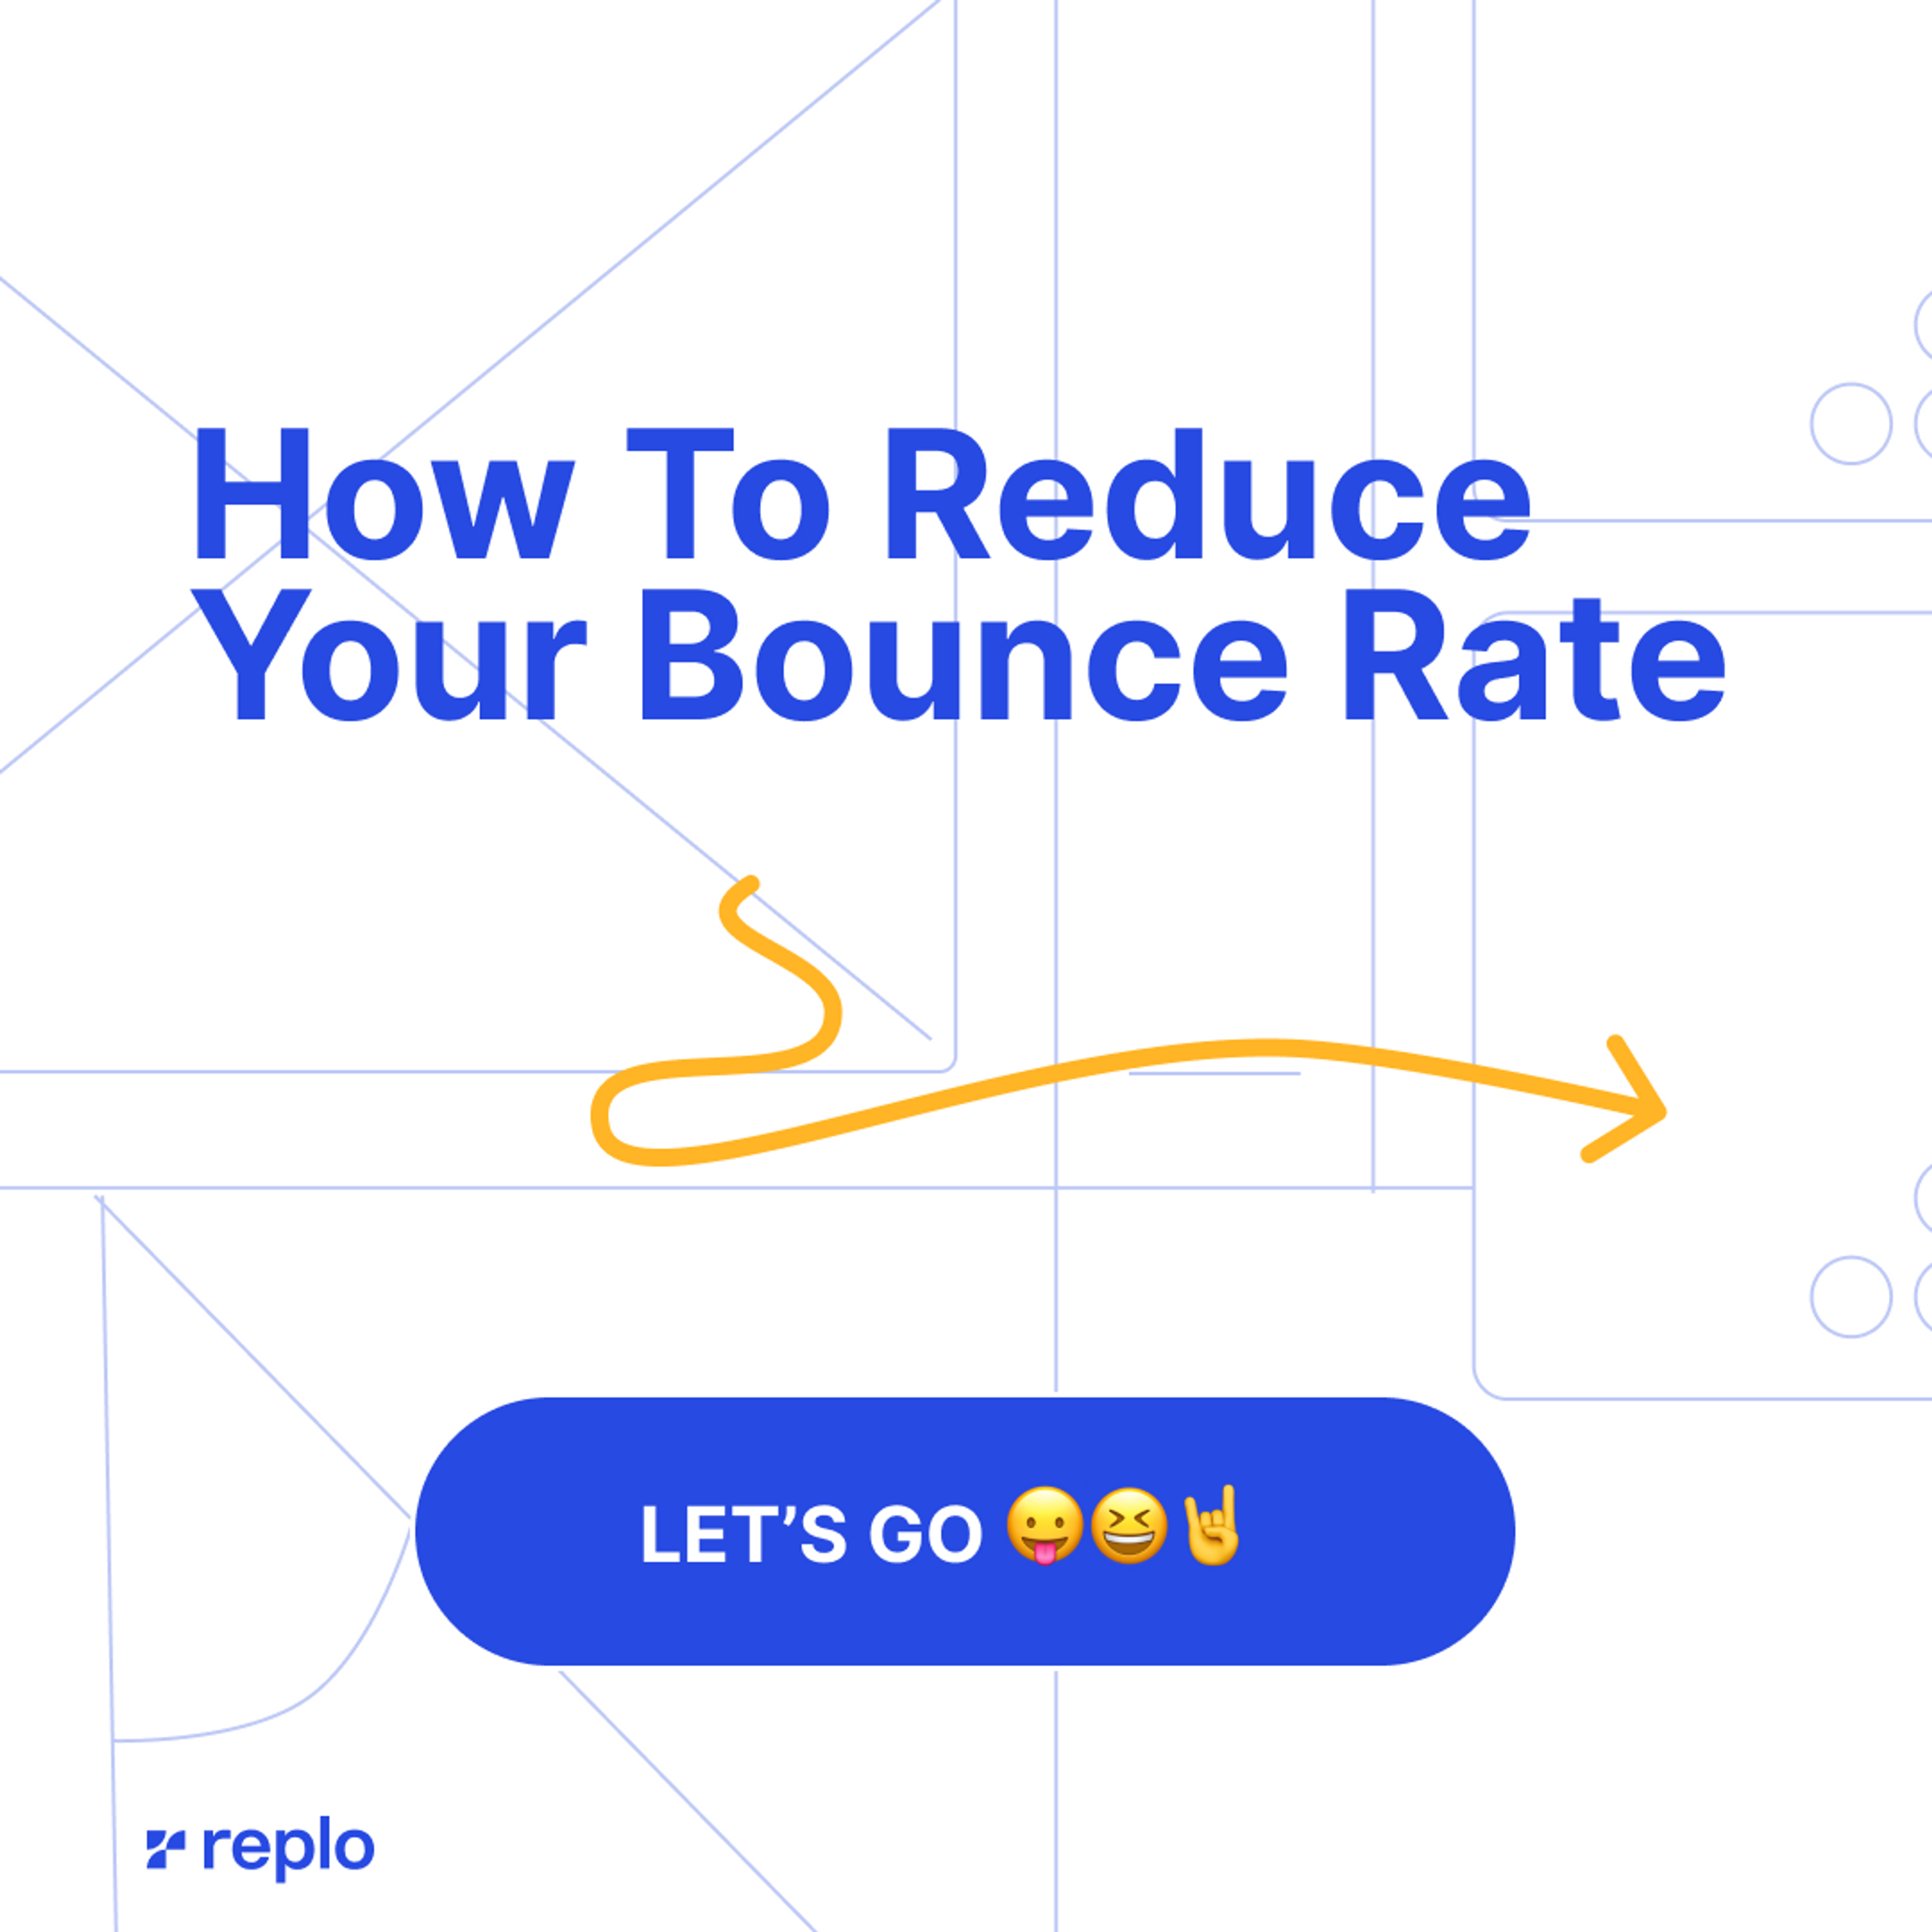 How To Reduce Your Bounce Rate